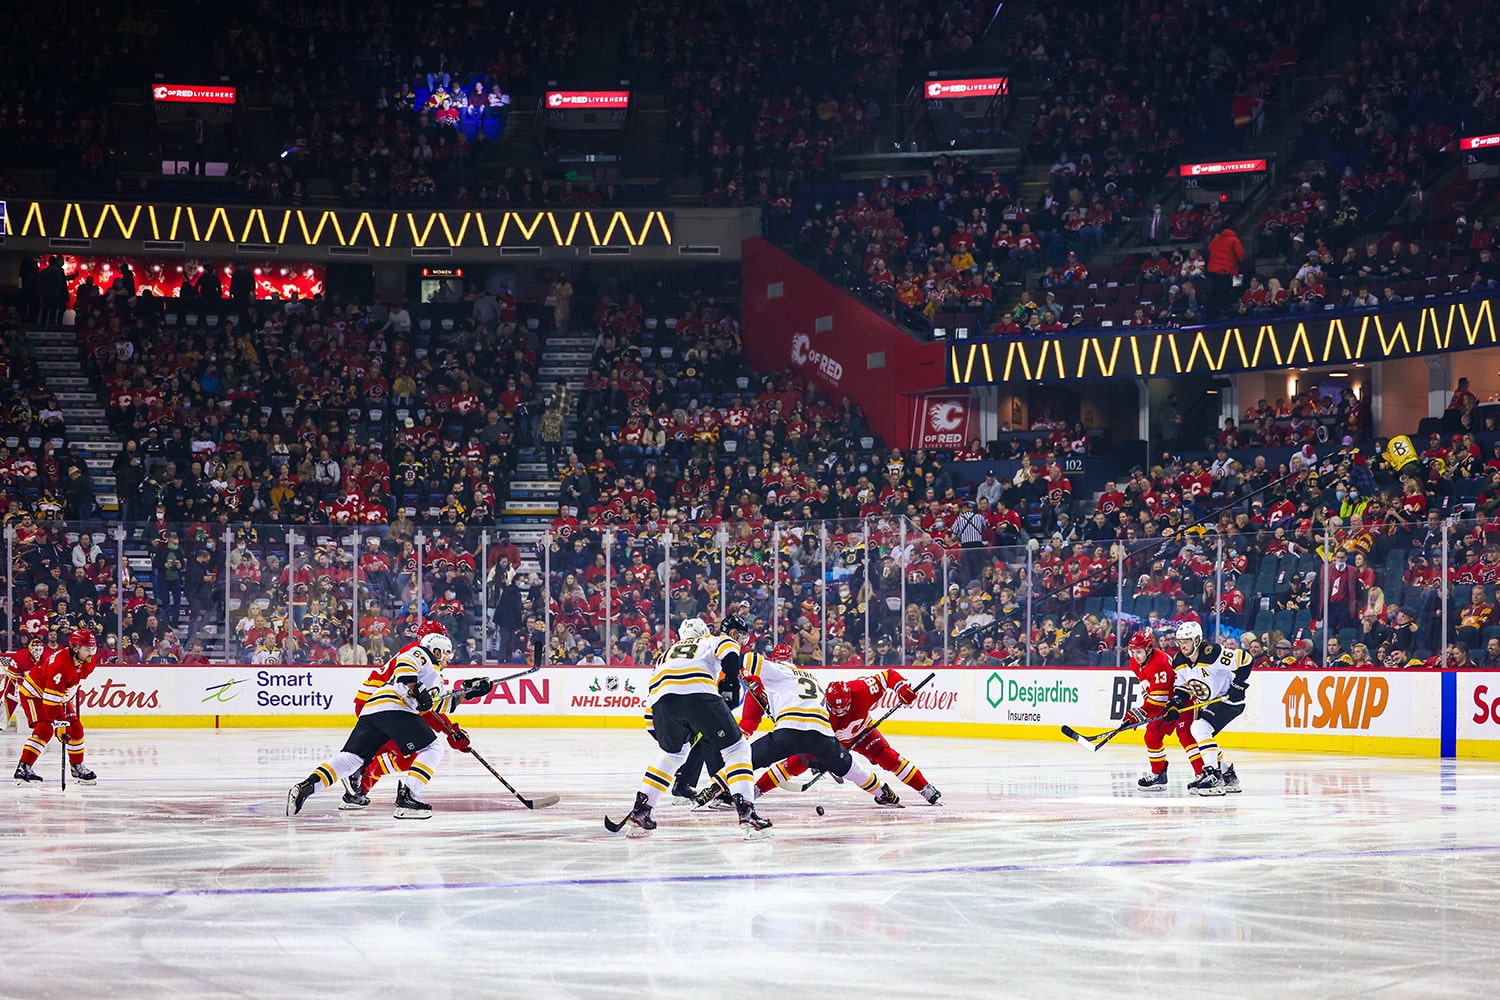 General view of the opening face off during an NHL game.